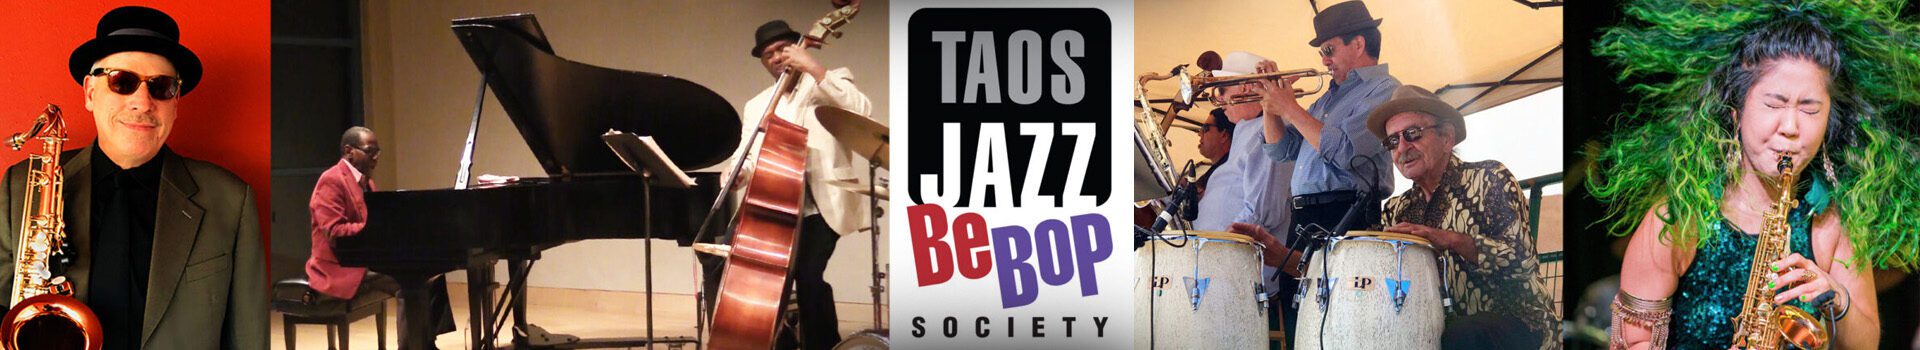 Taos Jazz Festival Logo and Performers